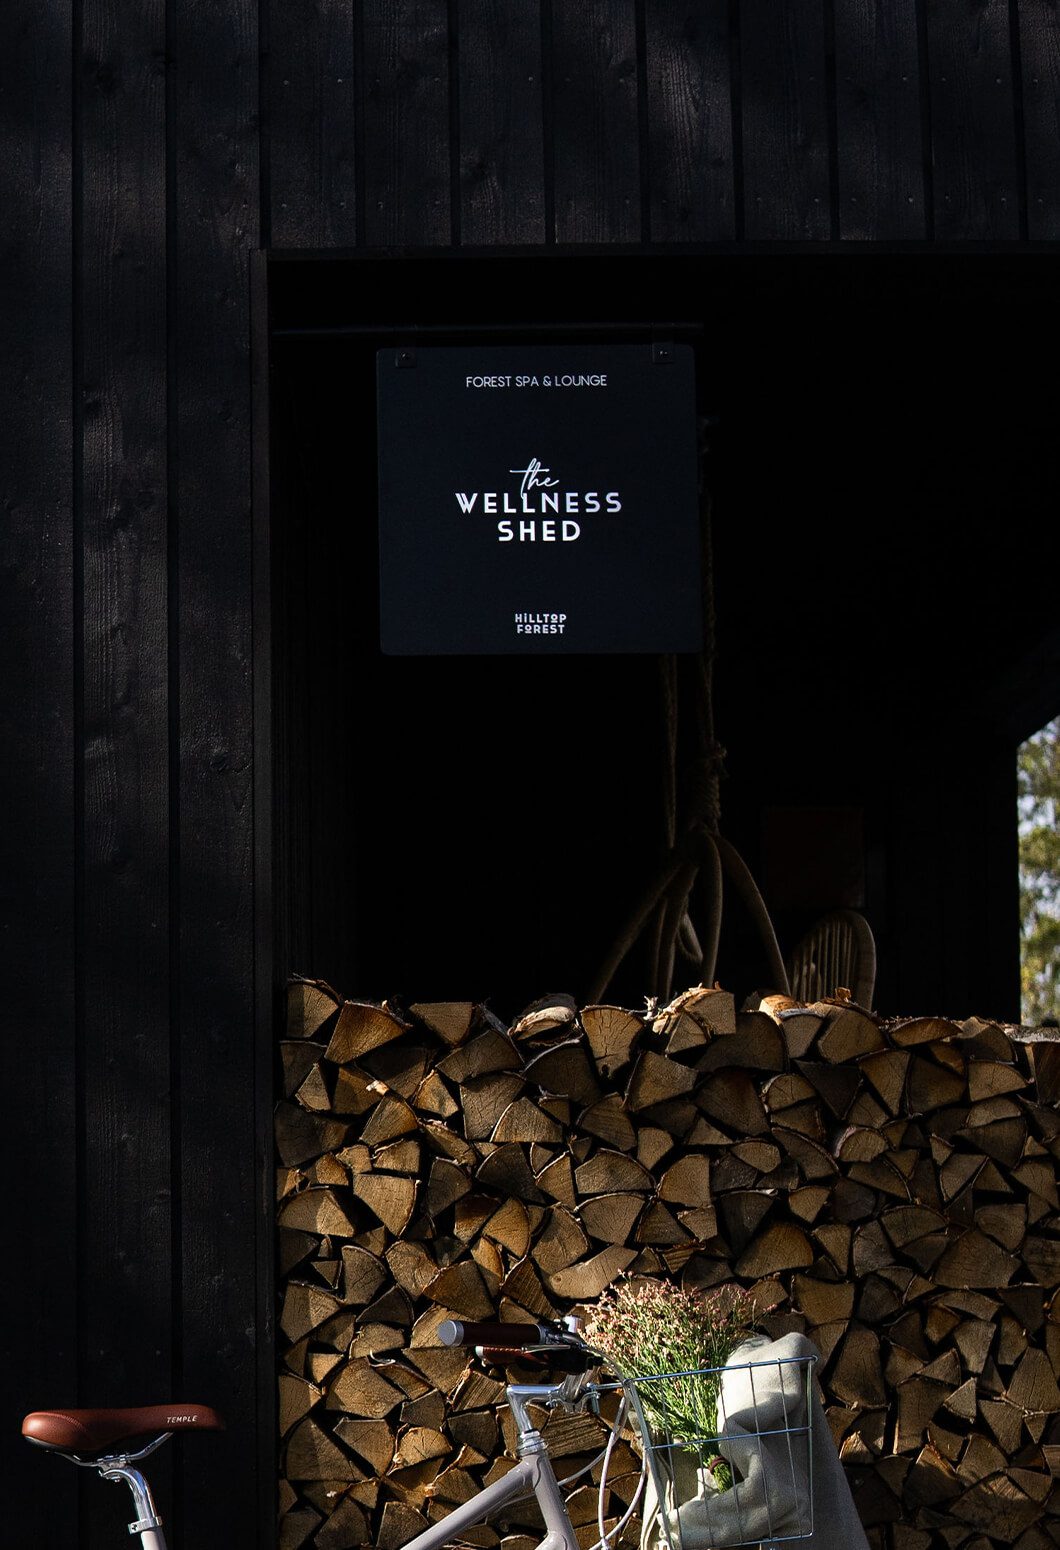 The Wellness Shed hanging brand signage